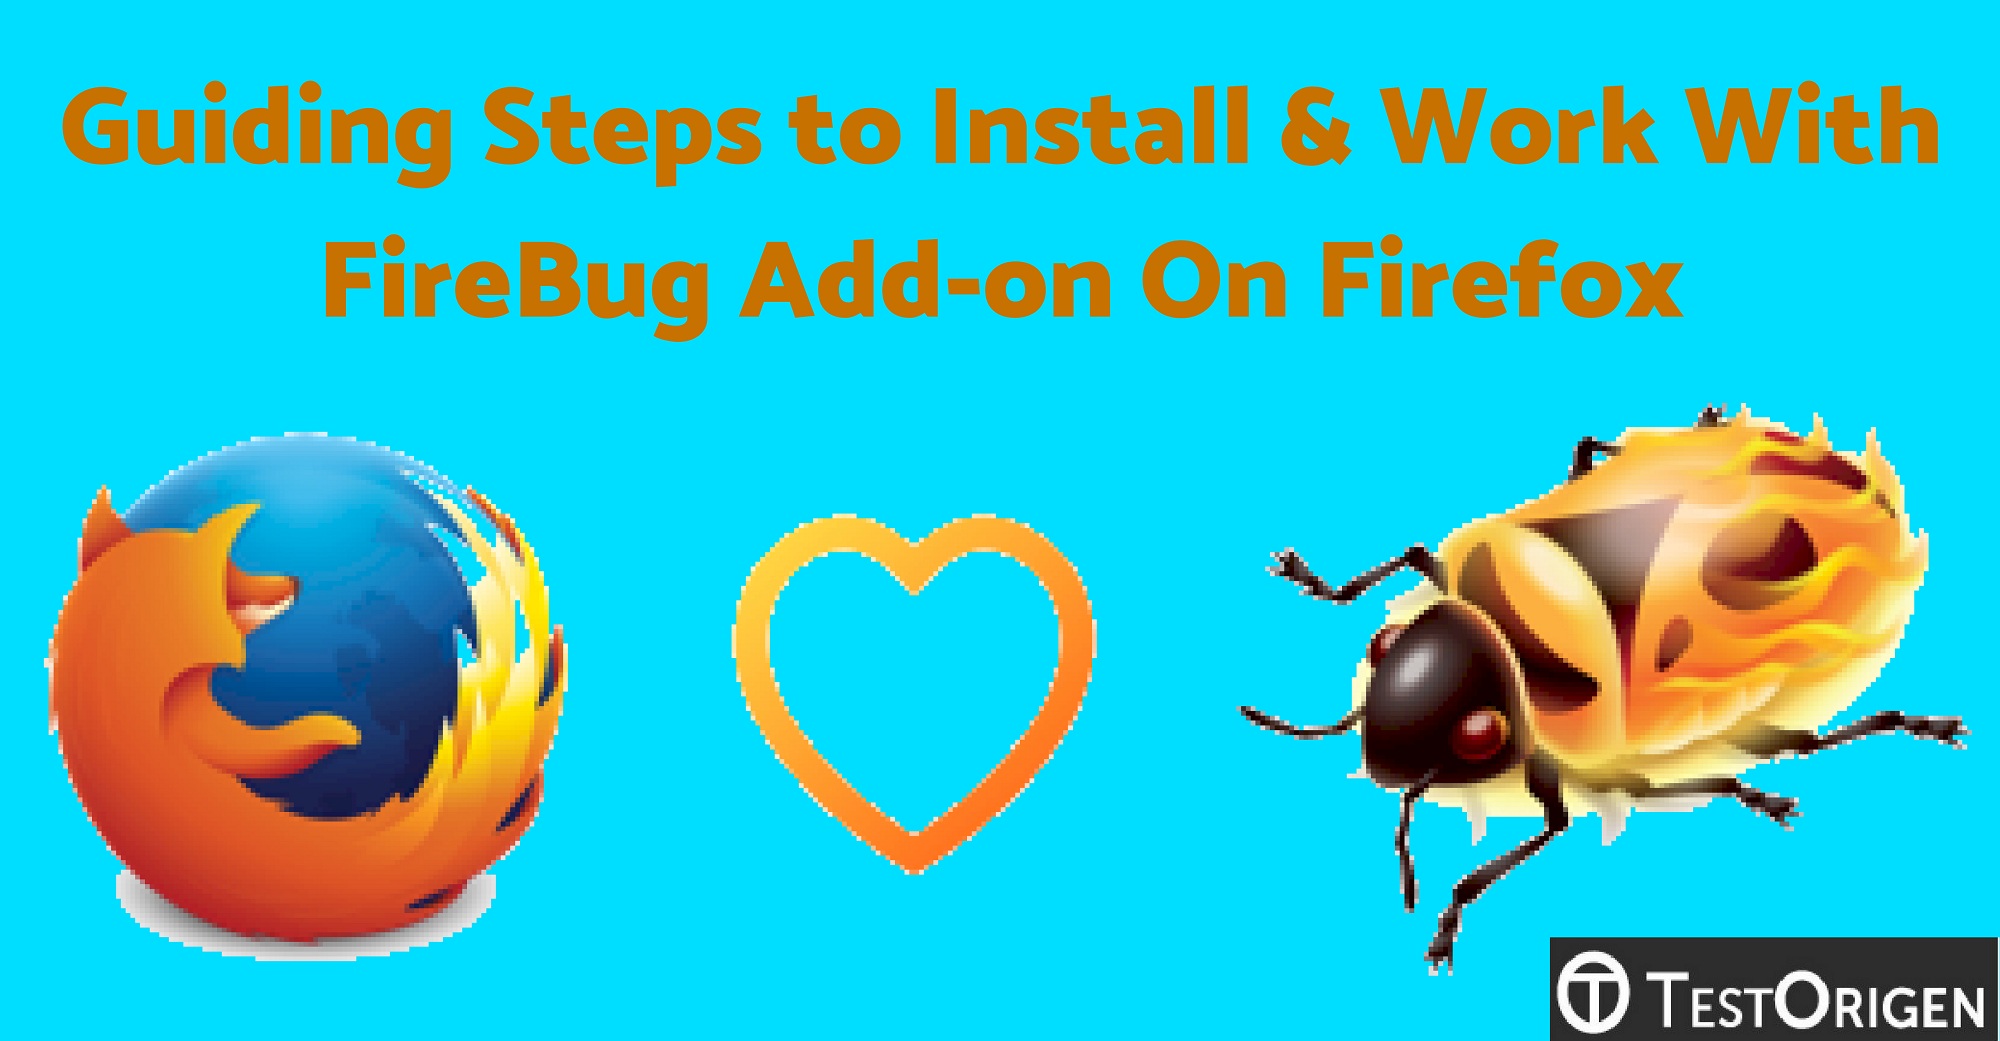 Guiding Steps to Install & Work With FireBug Add-on On Firefox